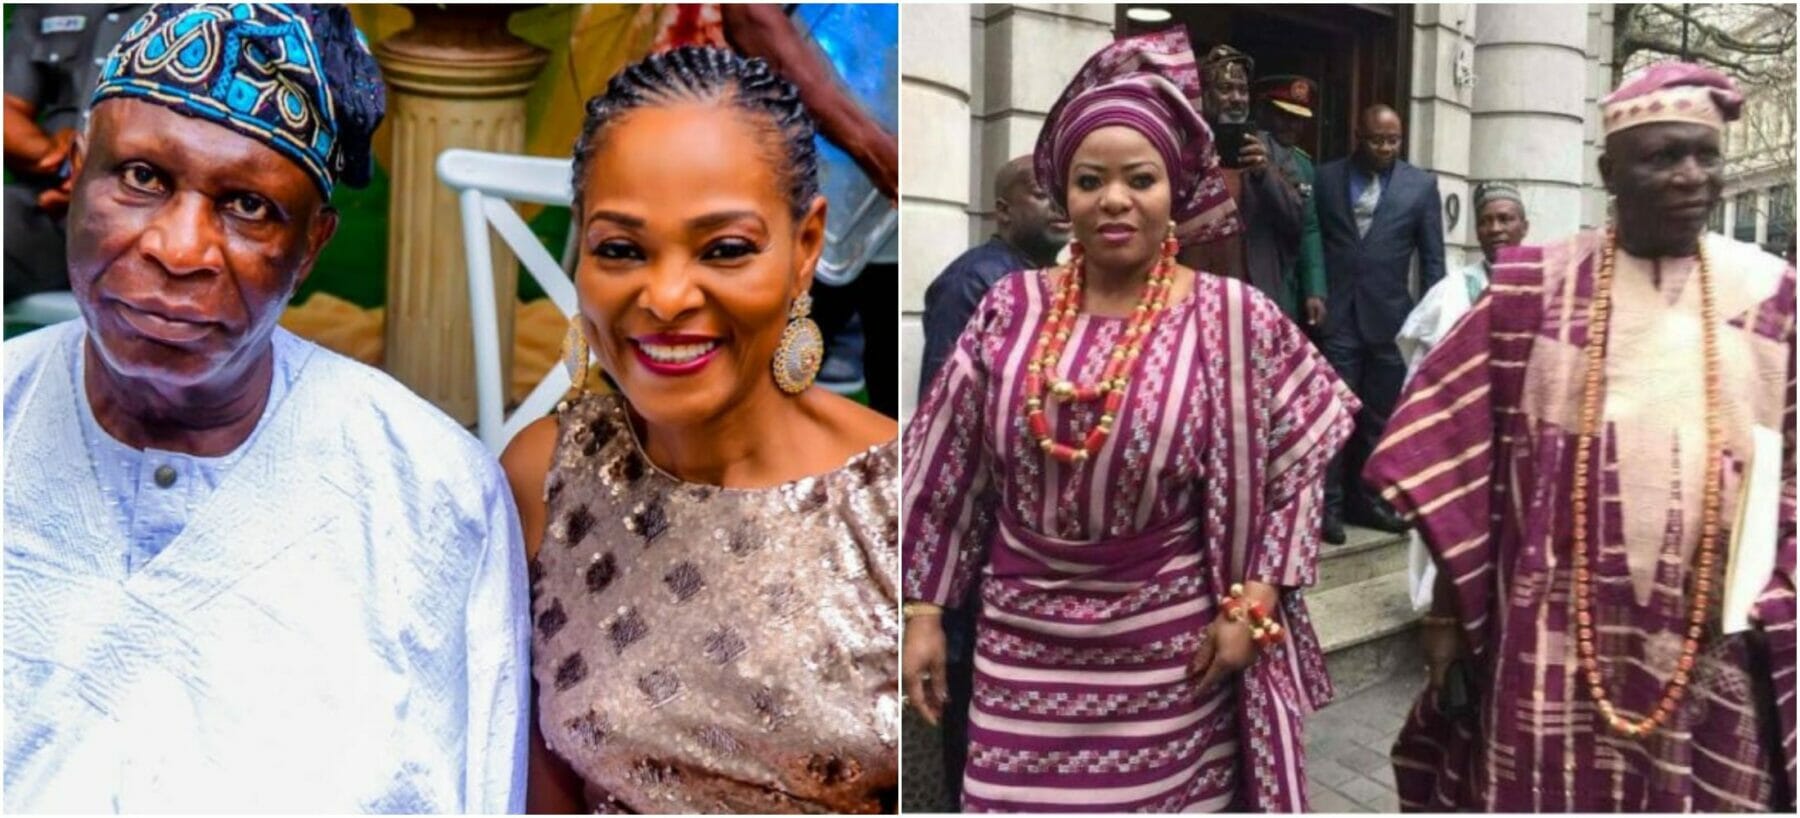 Justice Oguntade Finally Dumps Dupe, Steps Out With New Lover